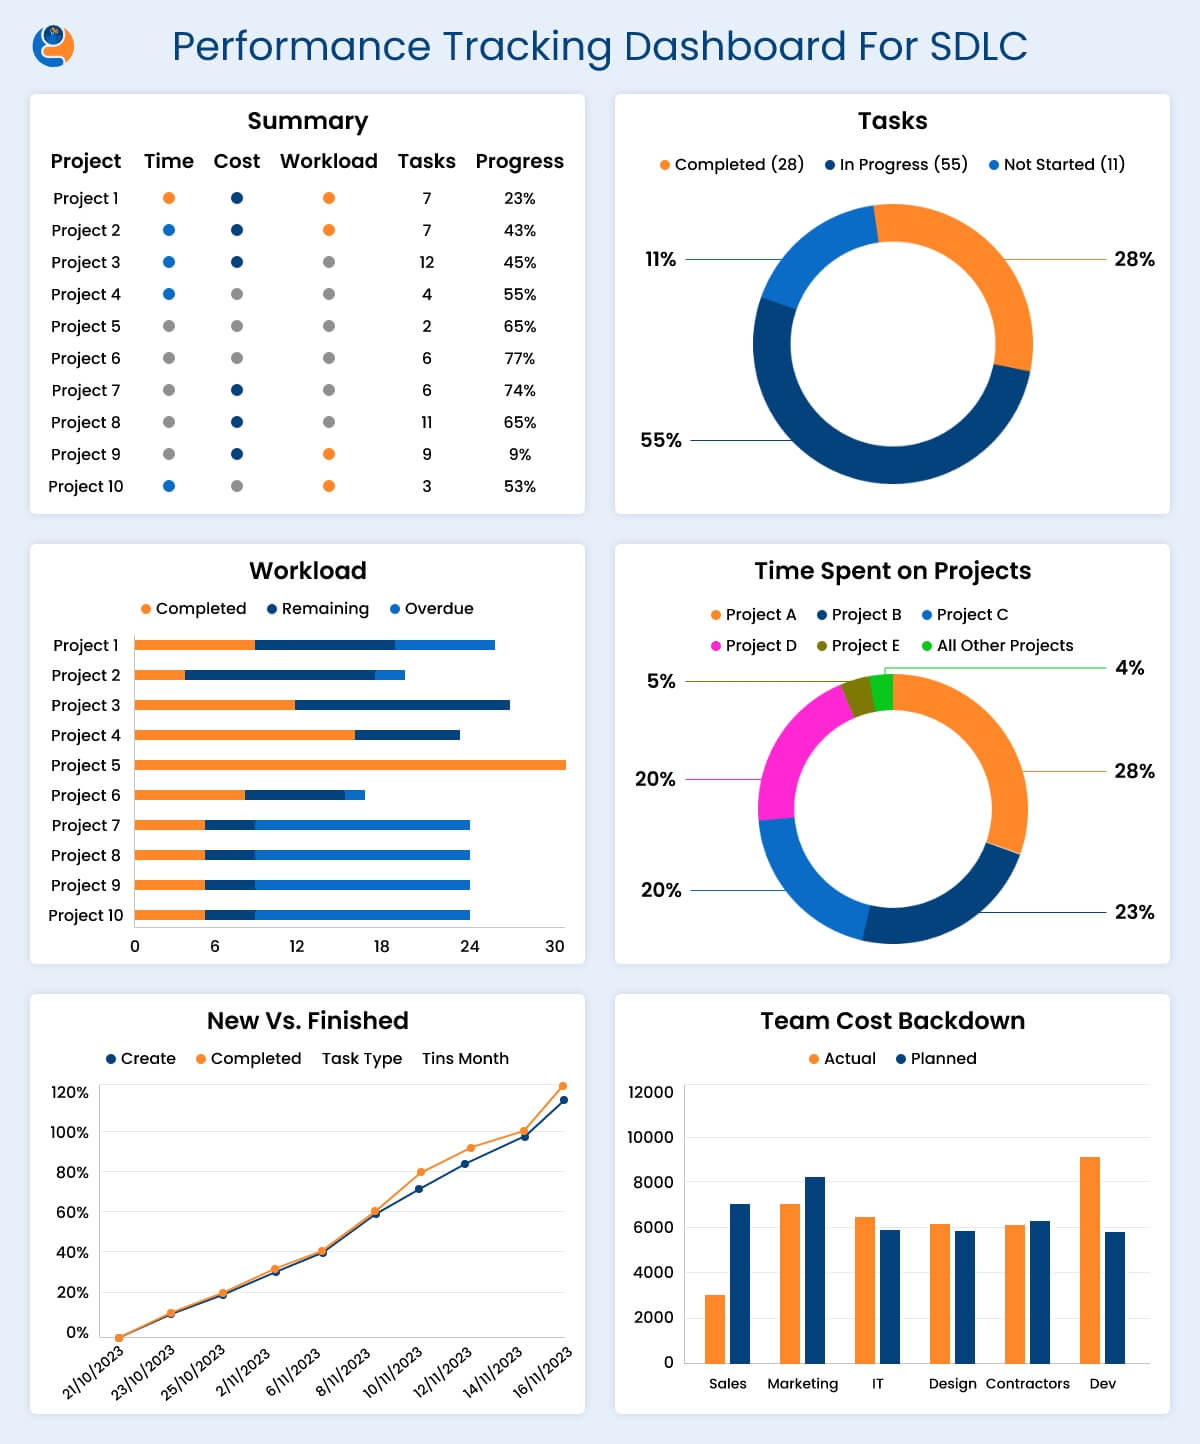 Performance Tracking Dashboard For SDLC